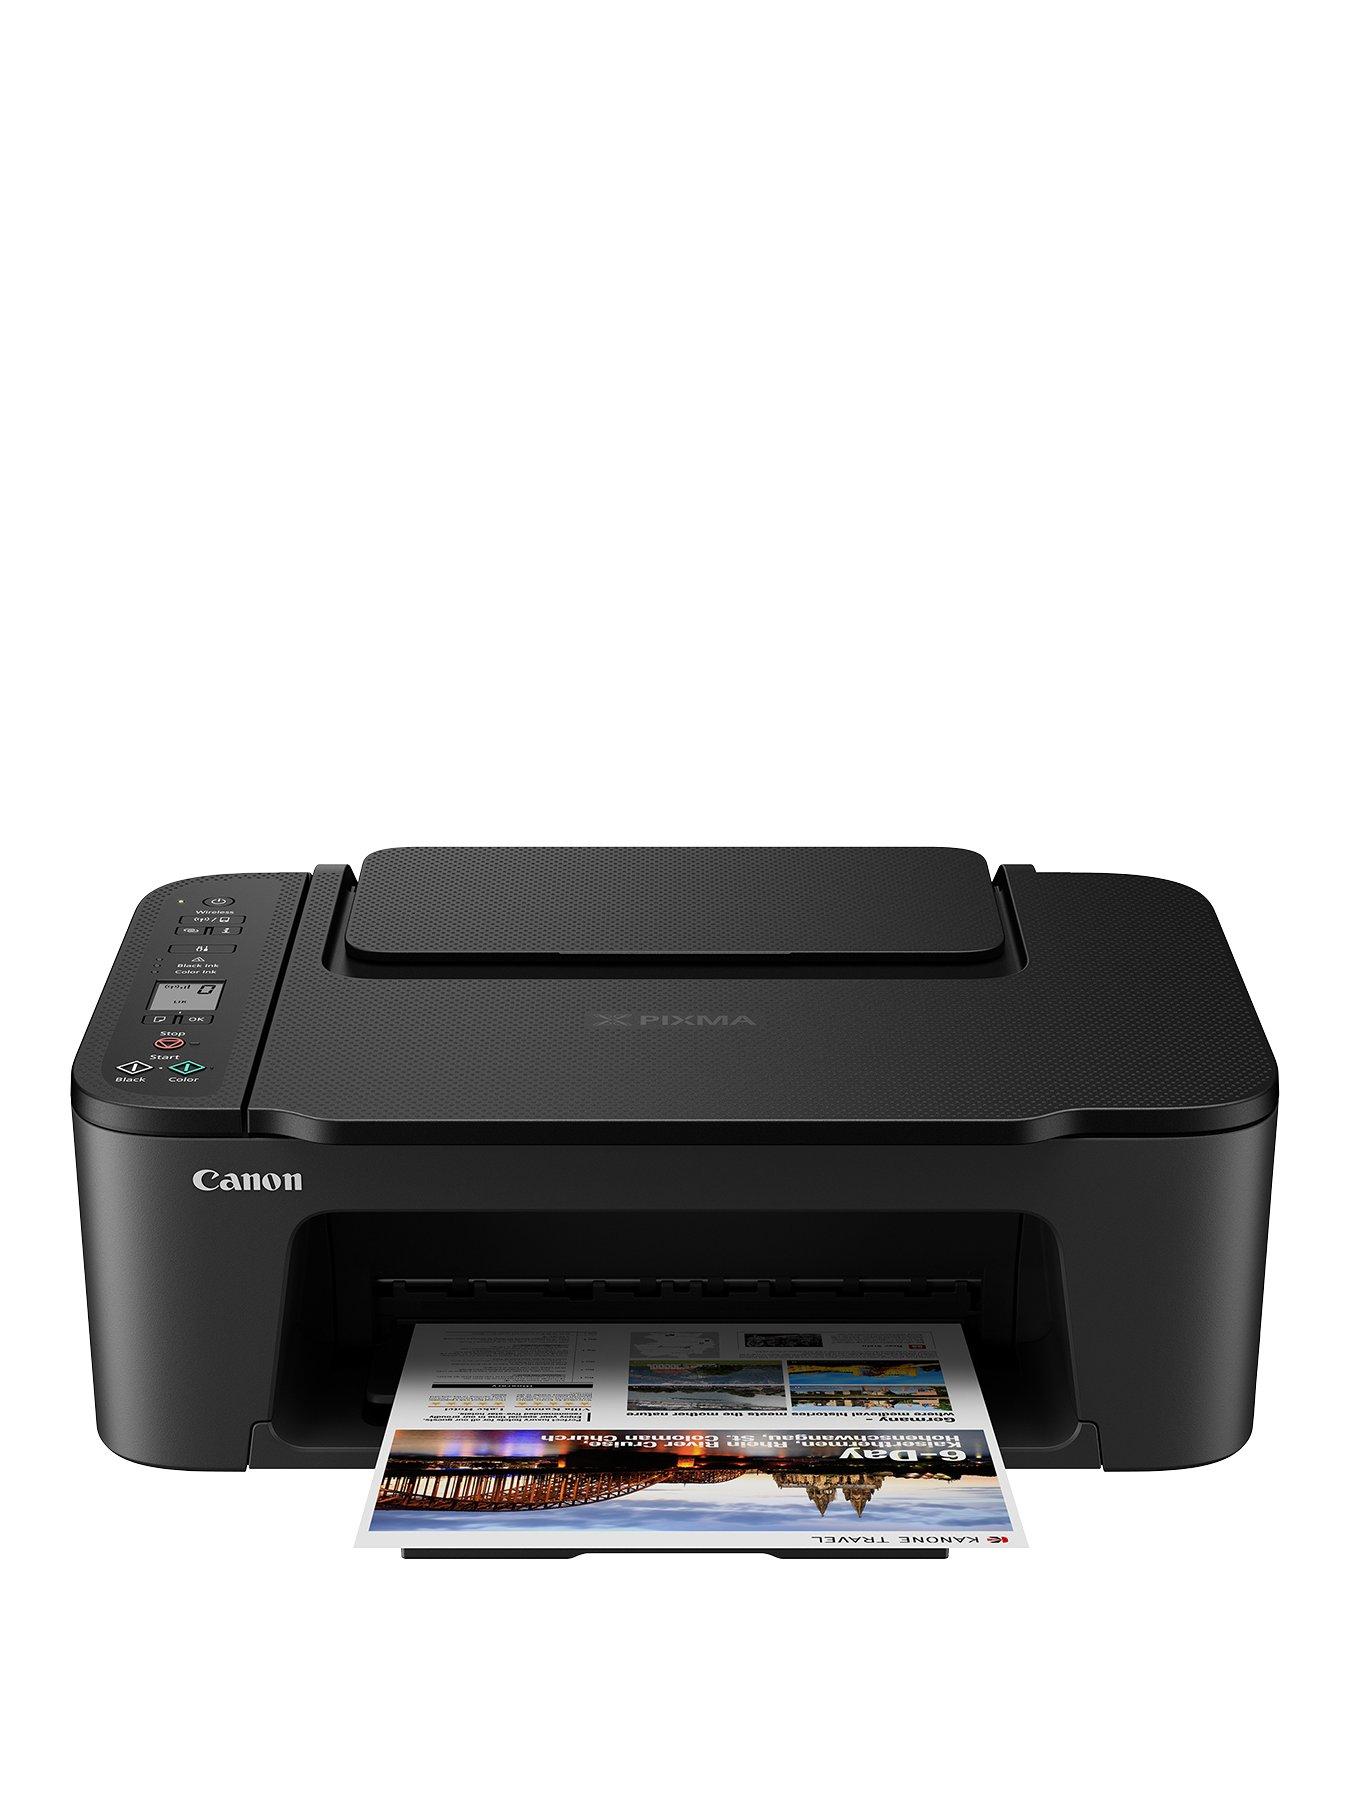 Epson Expression Home printer ink guide Ireland